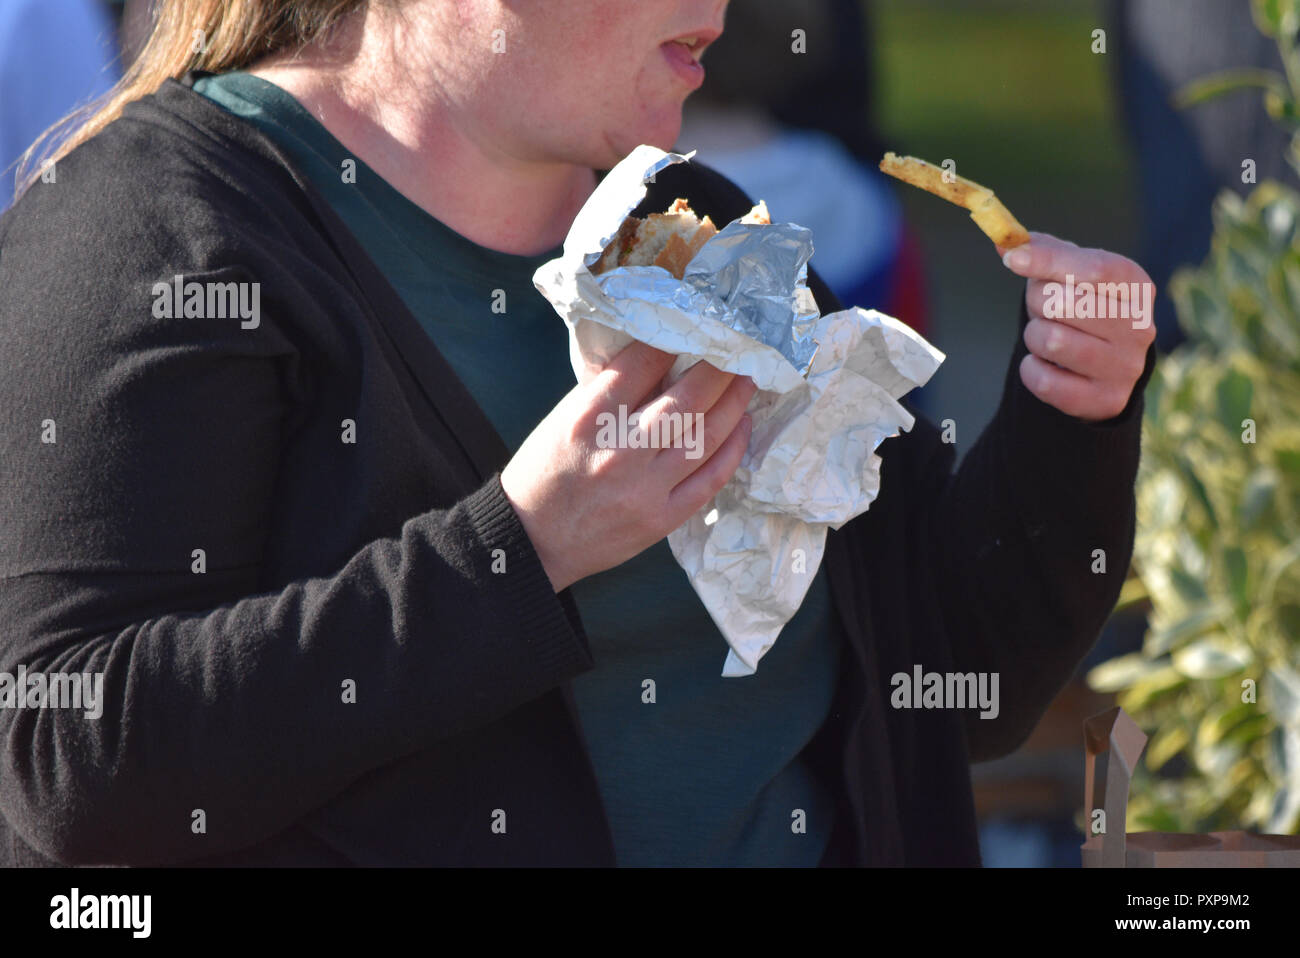 Obesity Epidemic UK, fast food outlets blamed. Fast food being eaten by an obese lady sitting in a British street. Oct 2018 Stock Photo